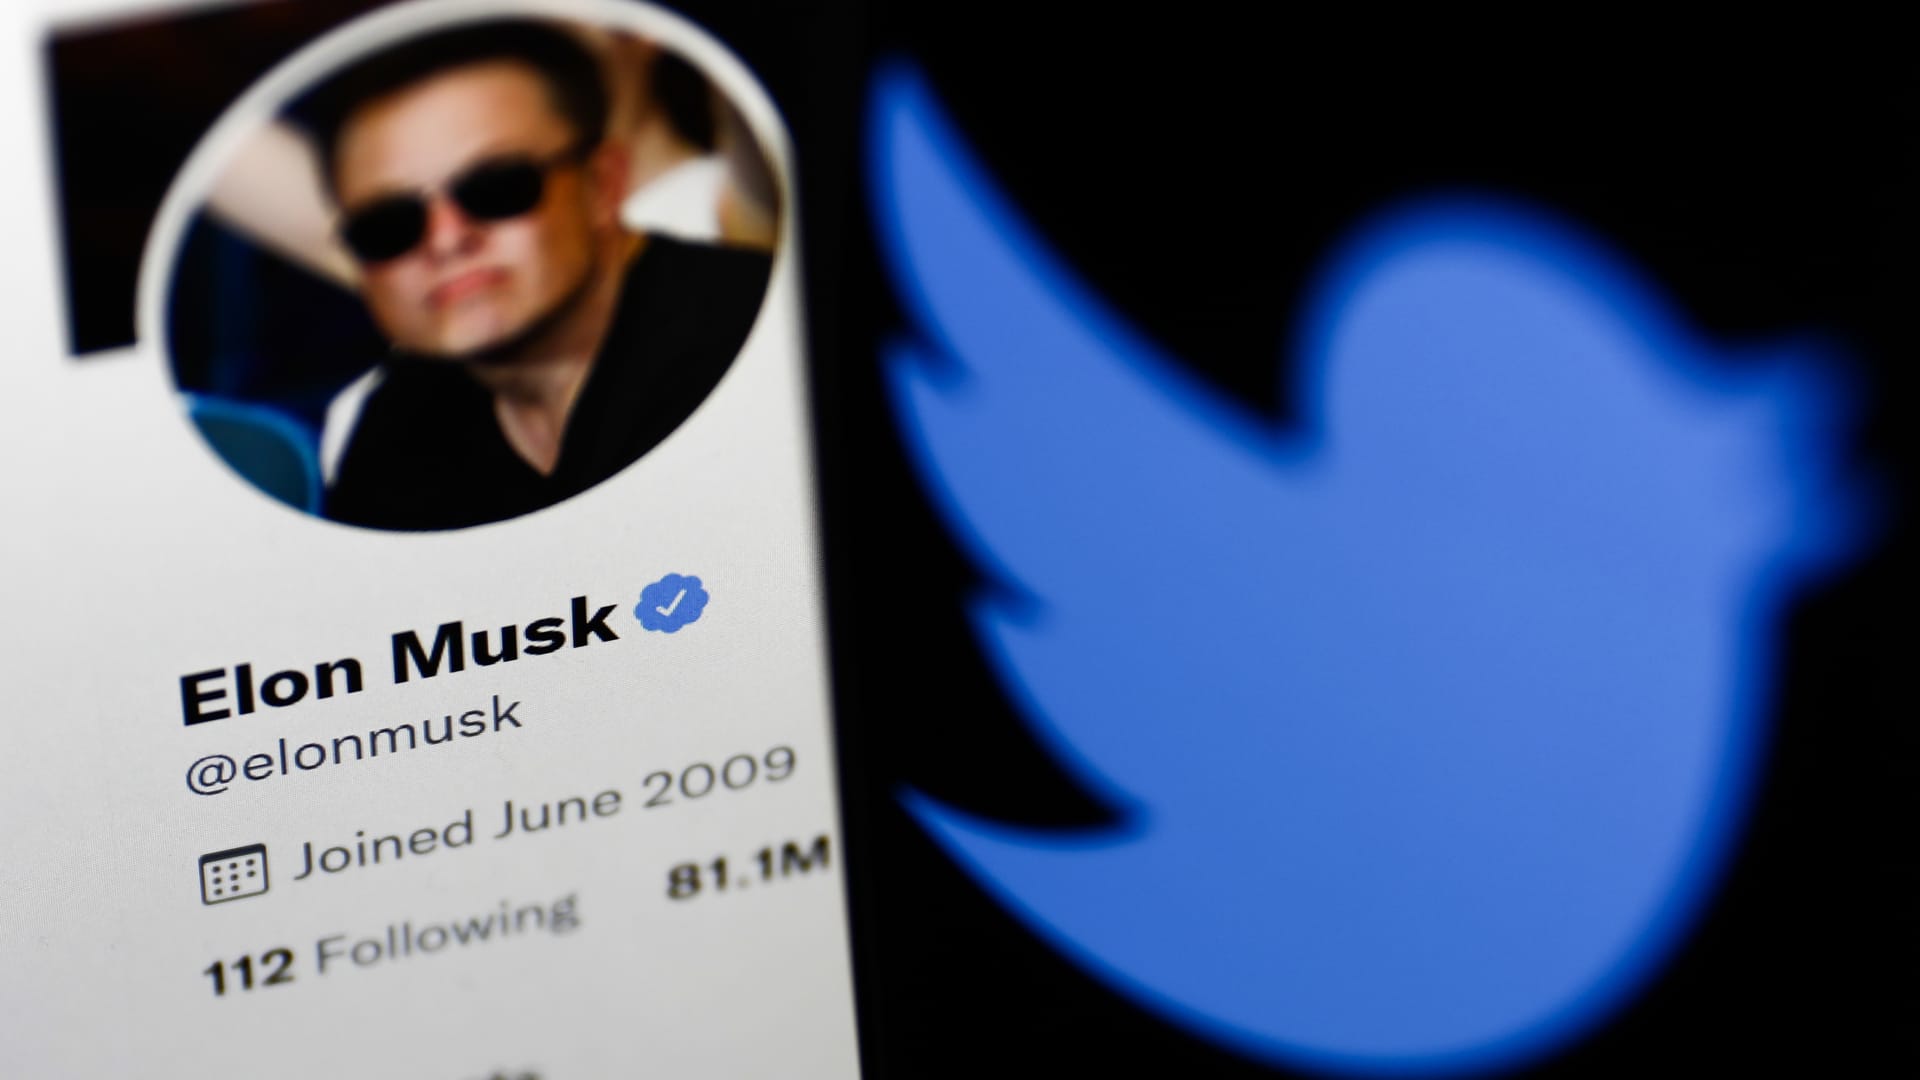 Twitter board adopts 'poison pill' after Musk's $43 billion bid to buy company